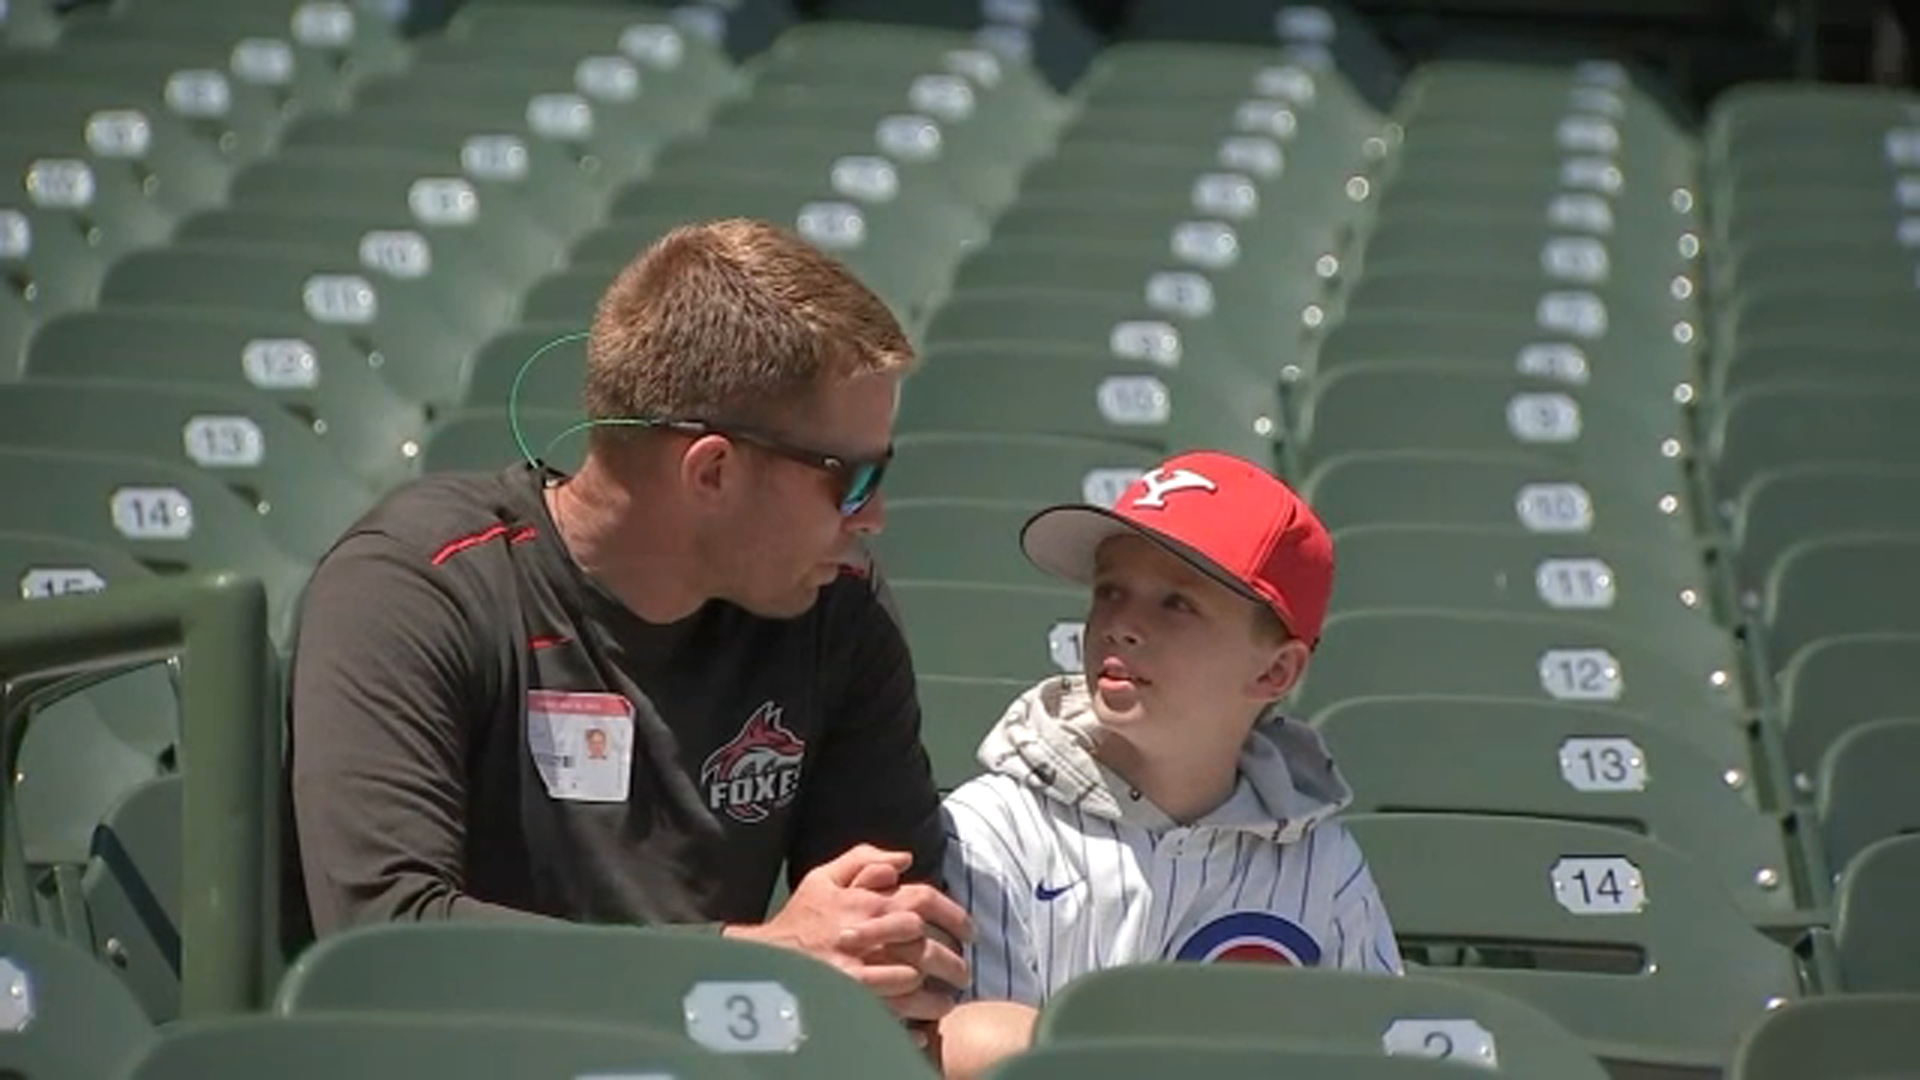 Chicago Cubs 'Sign' Teen Fan With Brain Cancer For a Day at